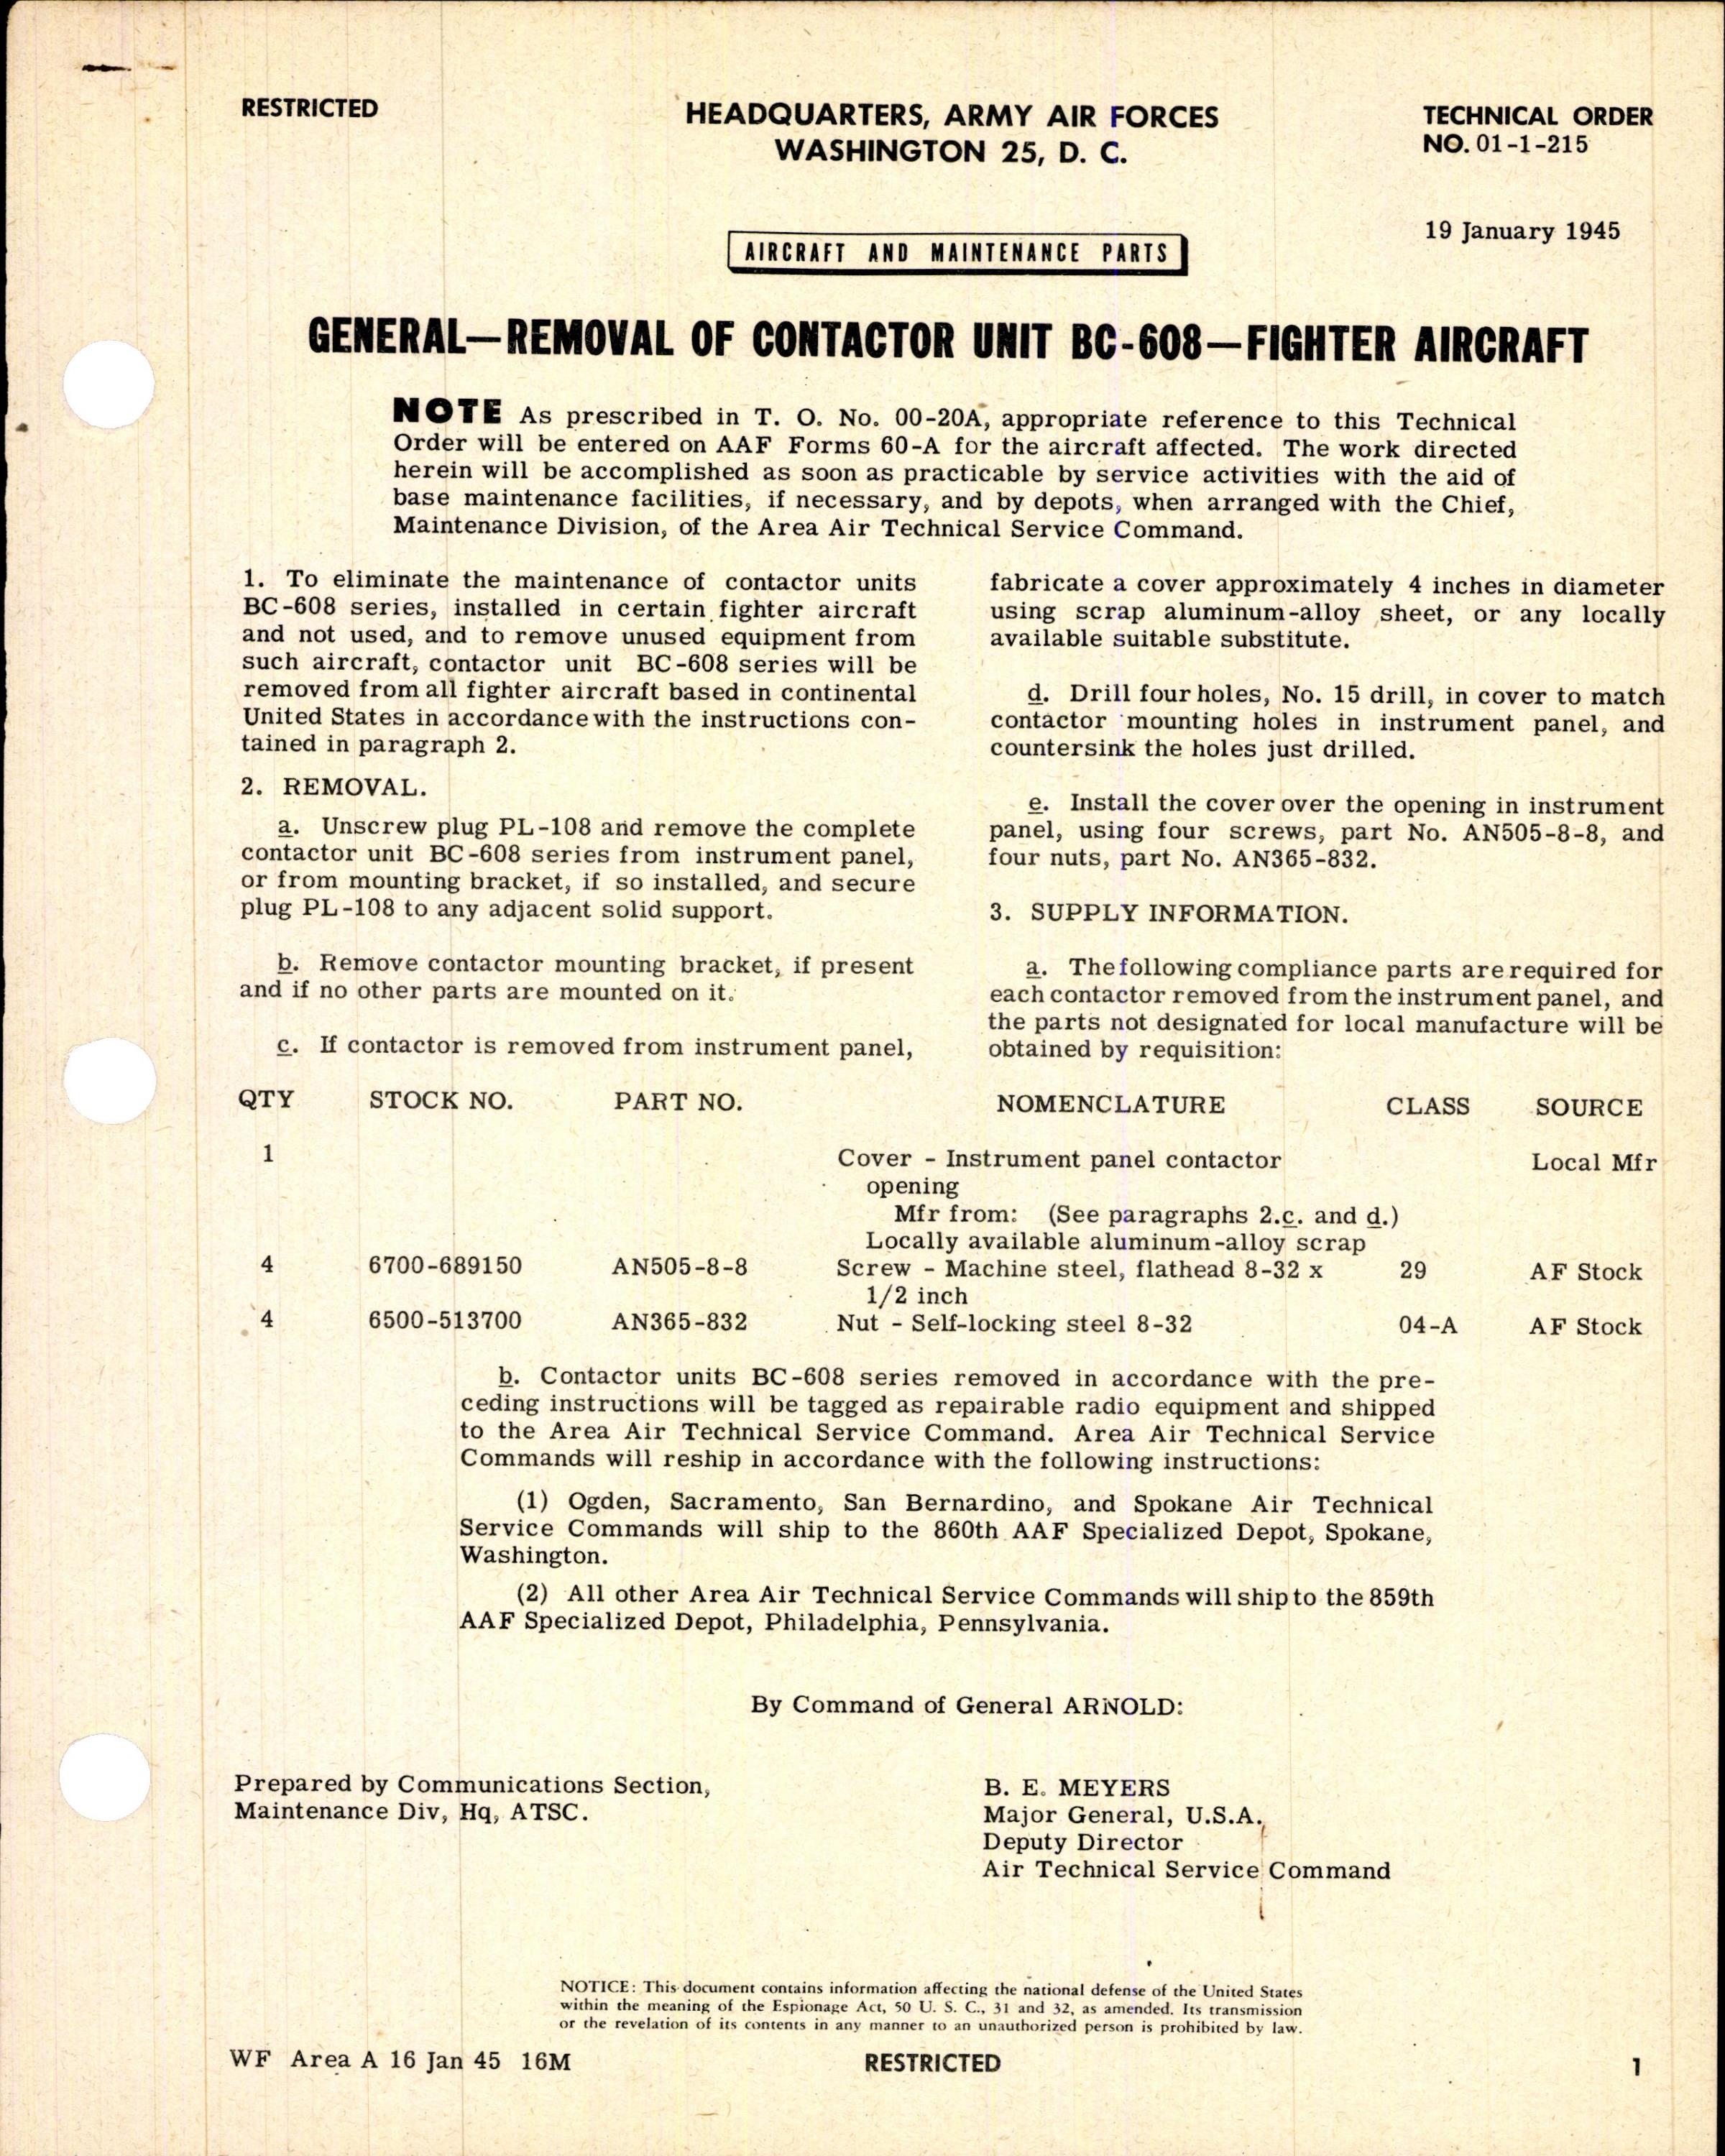 Sample page 1 from AirCorps Library document: Removal of Contactor Unit BC-608 for All Fighter Aircraft Based in Continental US